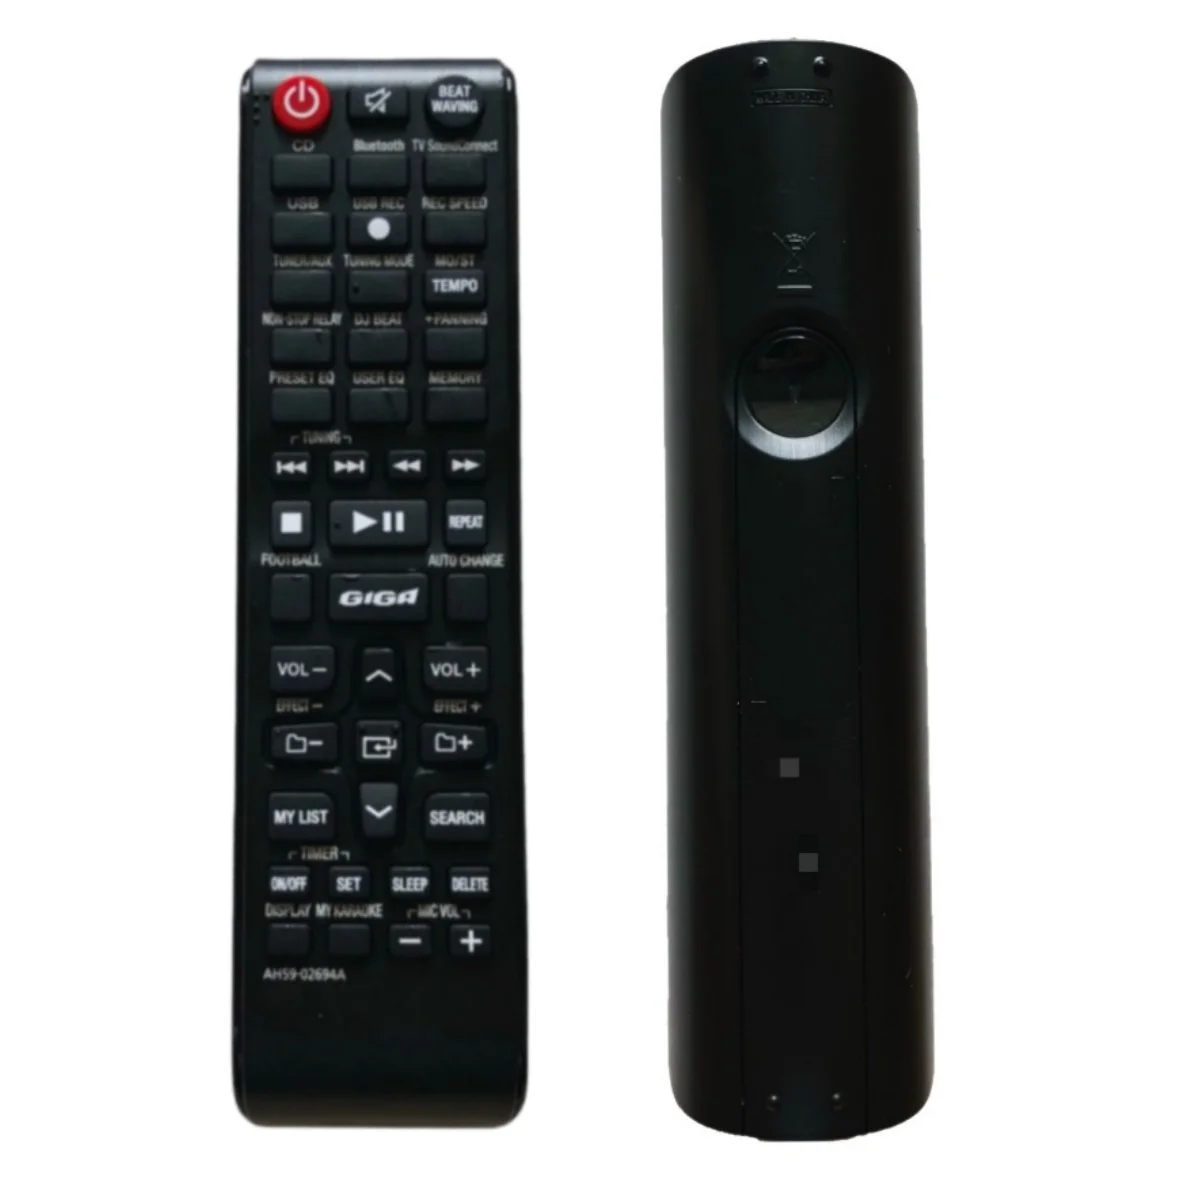 

Hot Selling Remote Control Fit for Samsung MX-JS8000 MX-JS8000/ZA MX-JS9500 MX-JS9500/ZA MXJS8000 MXJS9500 Giga Sound System